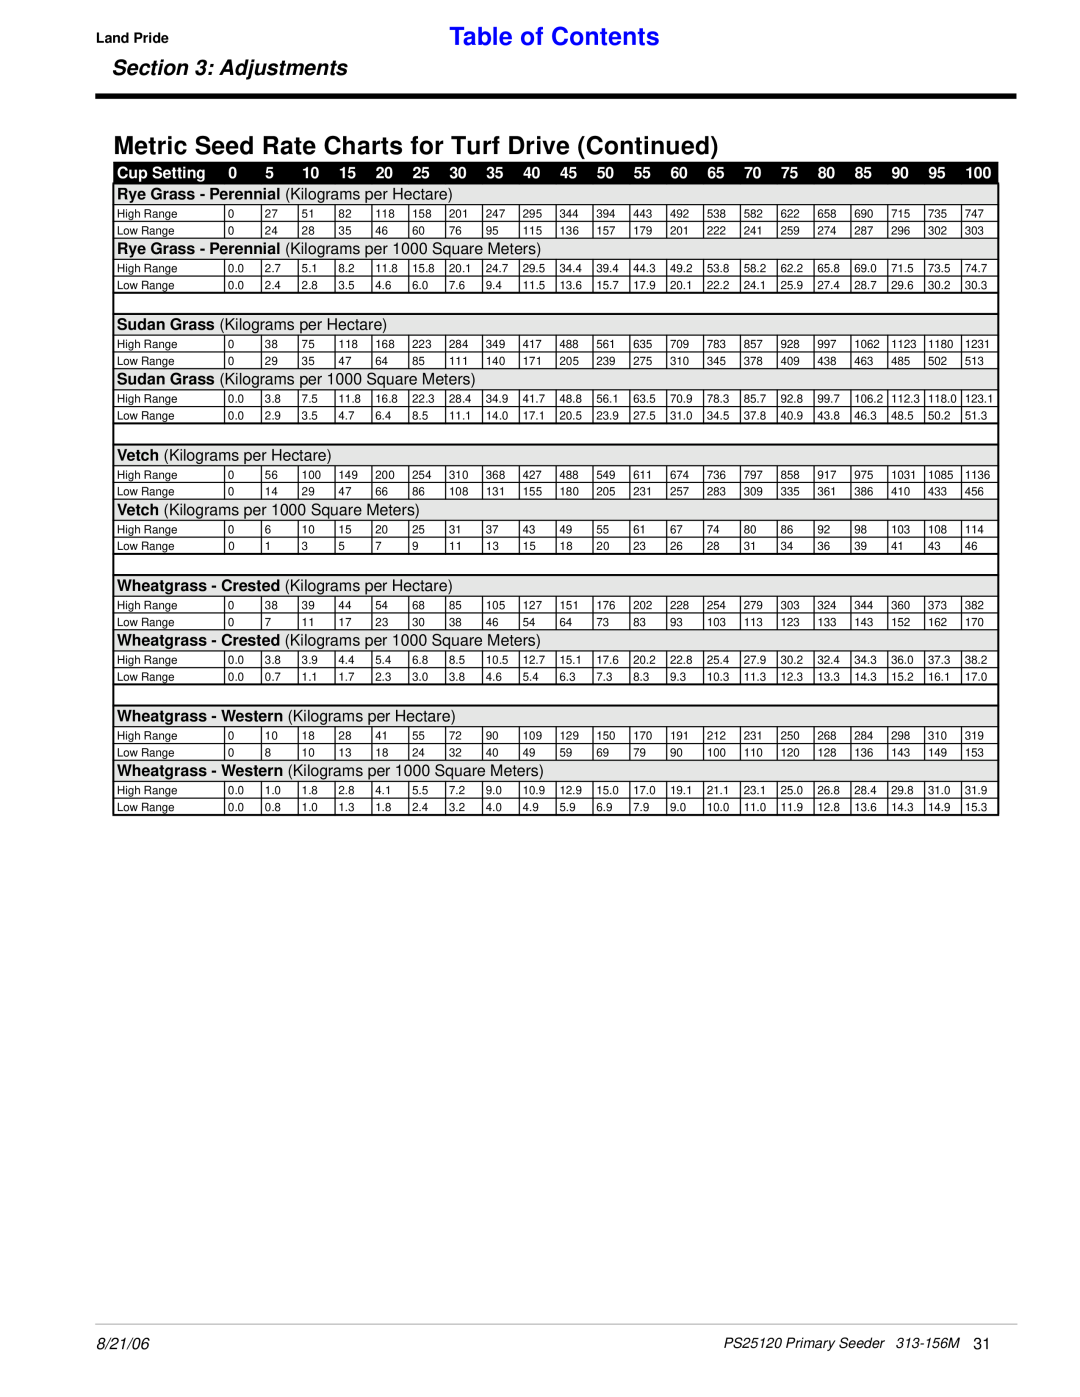 Land Pride PS25120 manual Metric Seed Rate Charts for Turf Drive Continued, Table of Contents, Adjustments, Rye Grass 